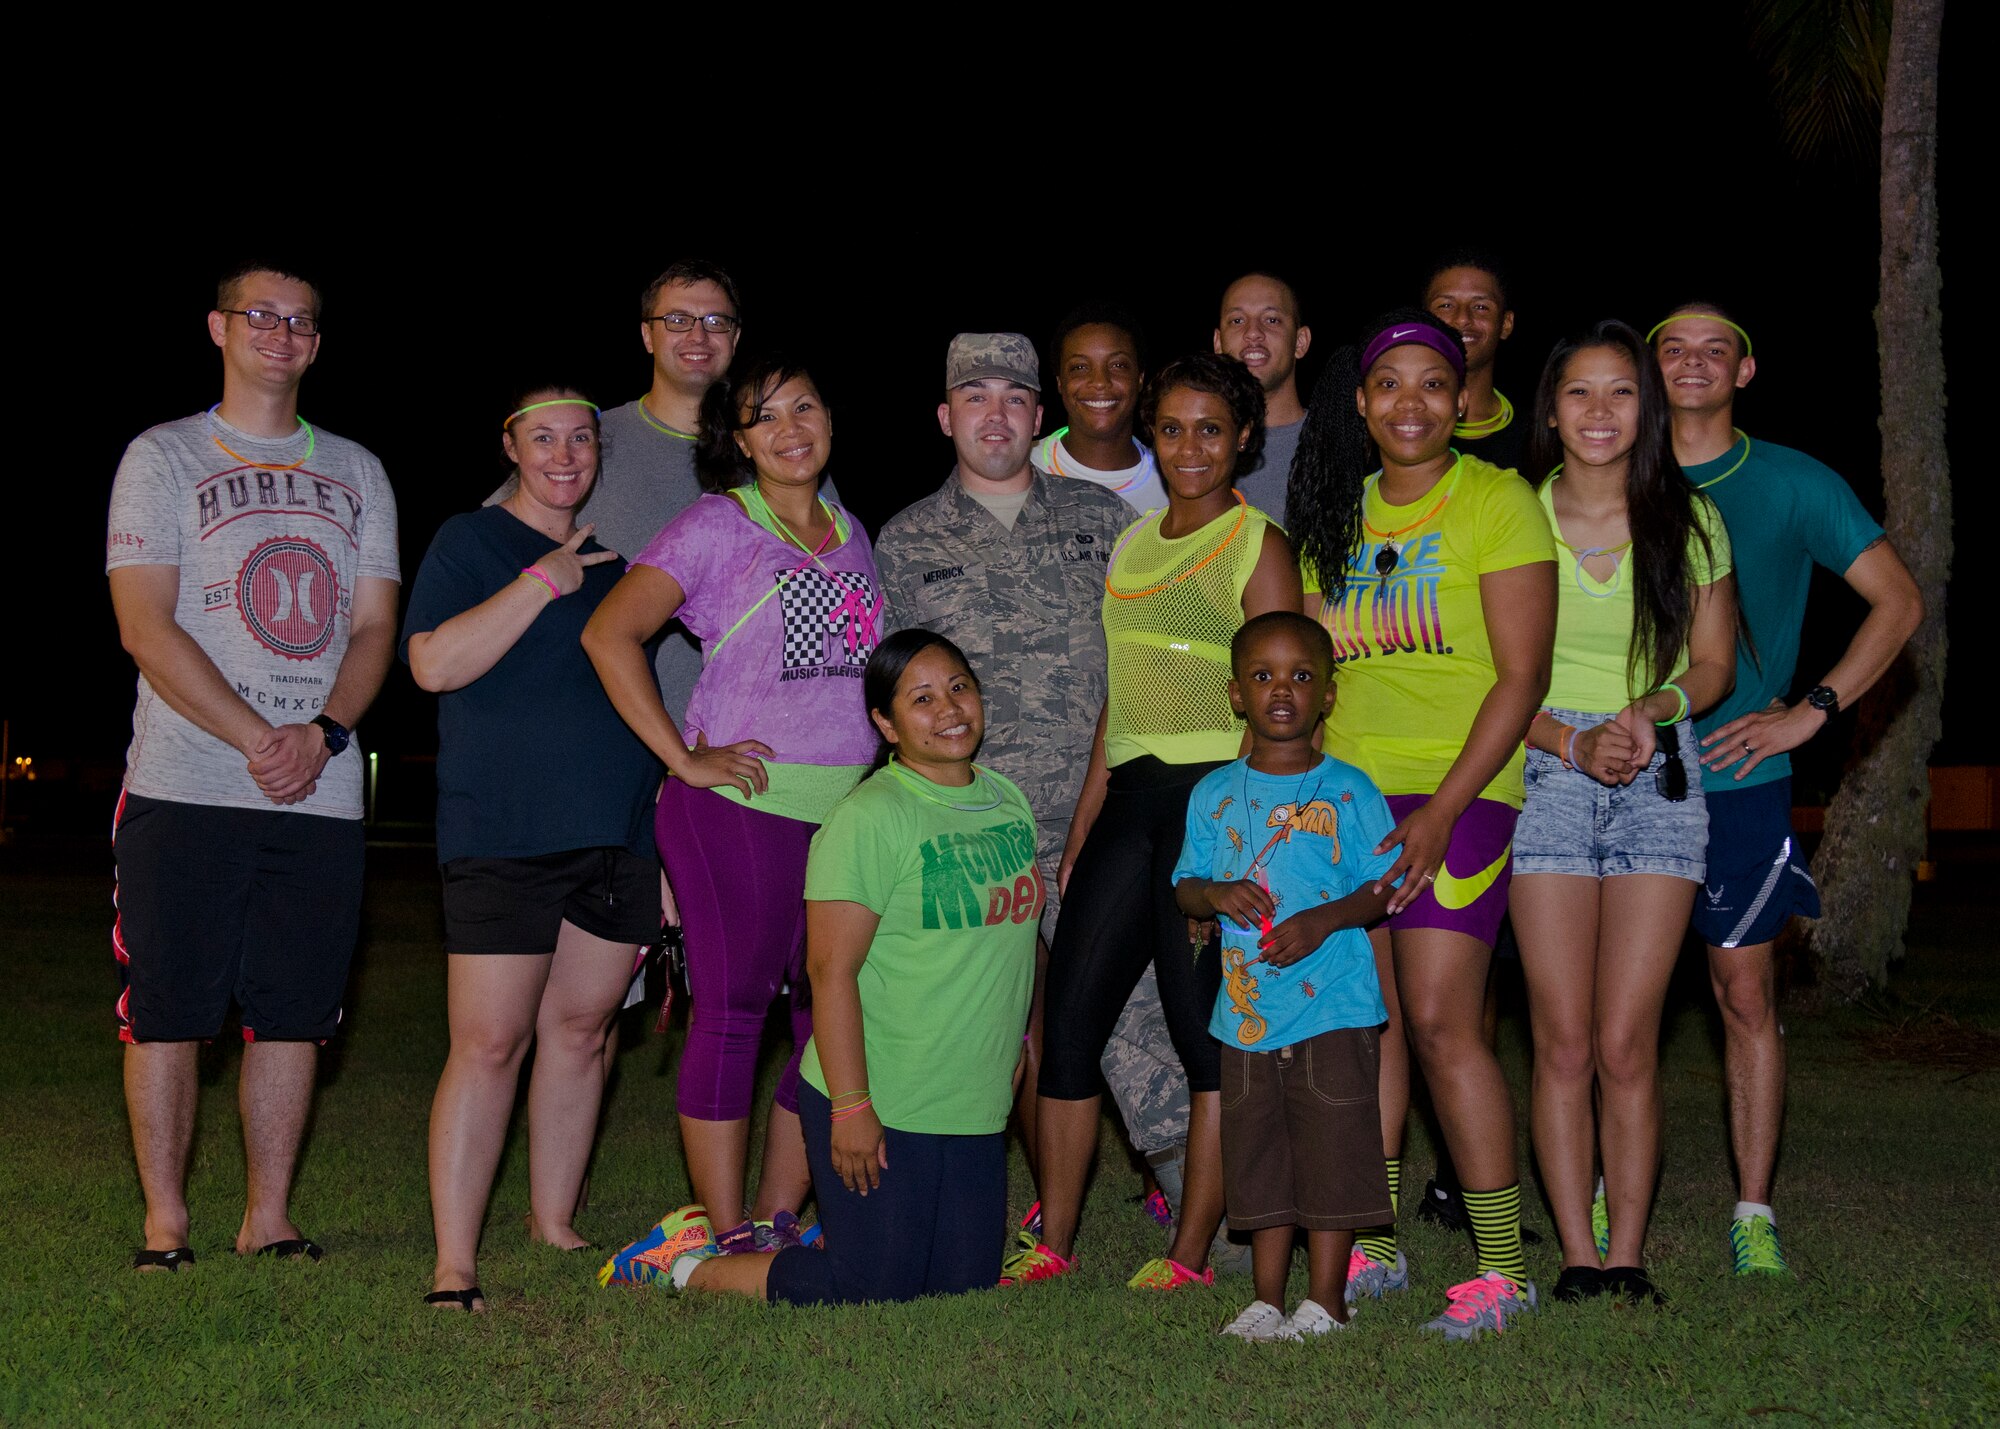 Lesbian, Gay, Bisexual and Transgender Pride Month committee members stand with volunteers after a glow run June 18, 2014, on Andersen Air Force Base, Guam. President Obama issued a proclamation this month recognizing the contributions LGBT Americans make to the Department of Defense. (U.S. Air Force photo by Senior Airman Katrina M. Brisbin/Released)